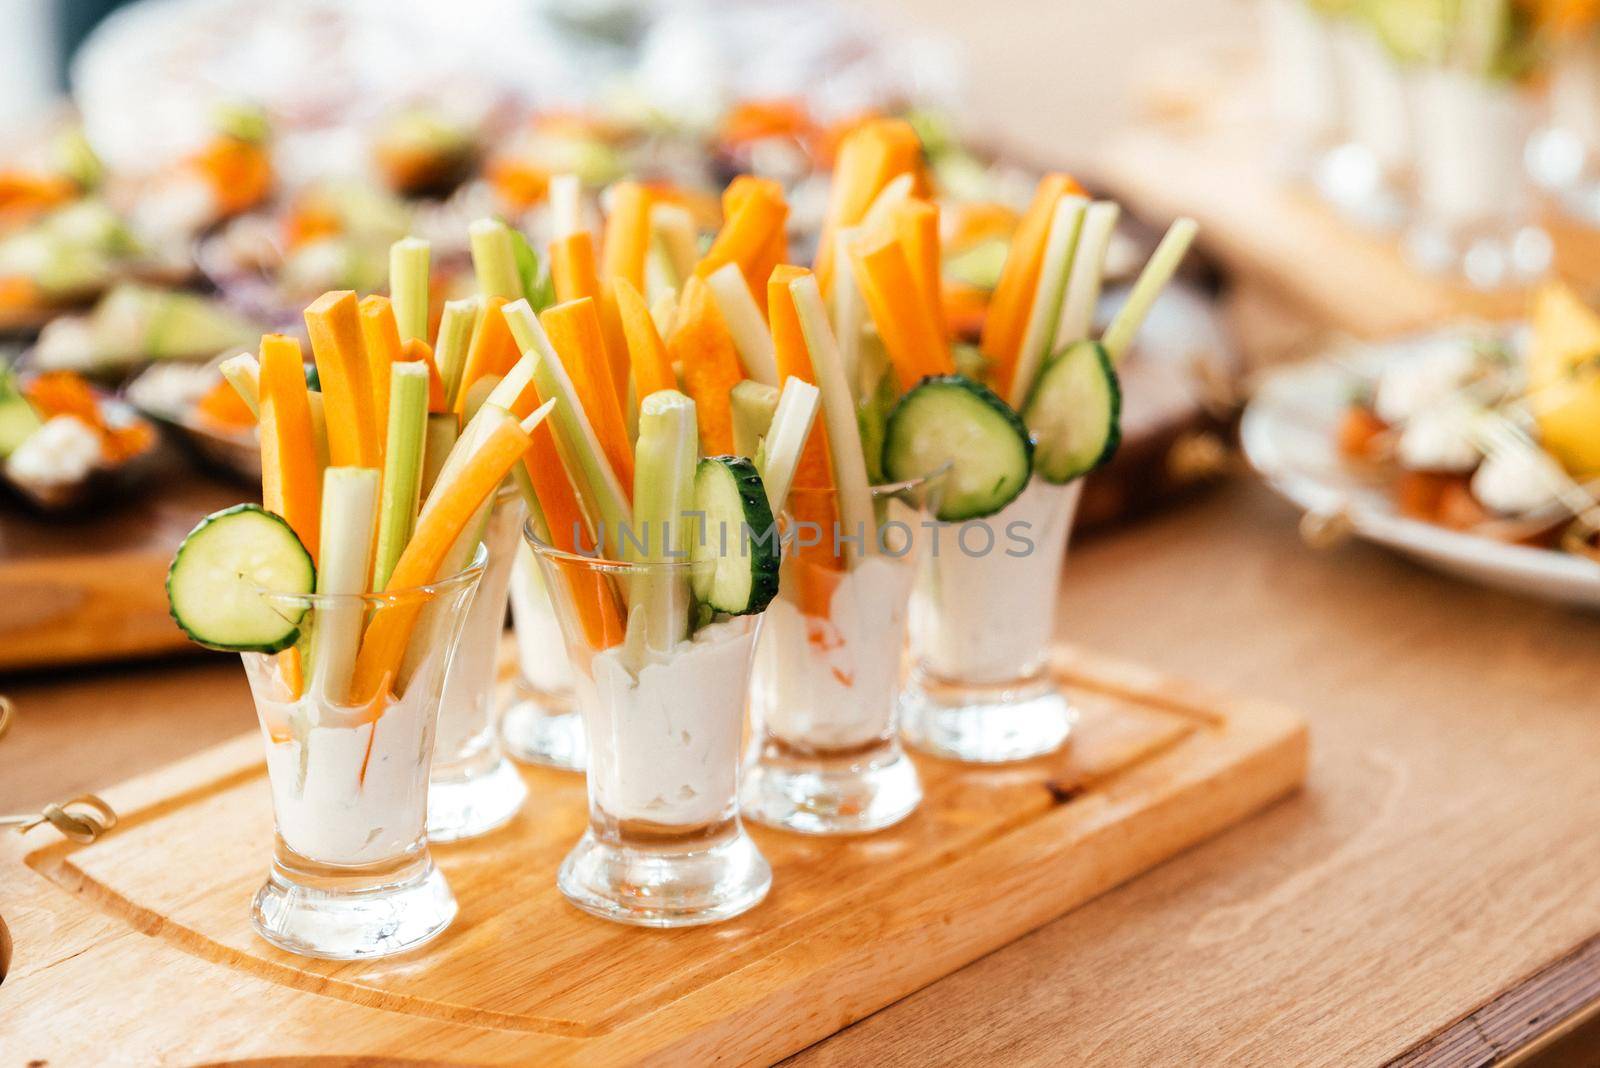 Holiday vegetable appetizers, Fresh vegetables in a yoghurt sauce by Mariakray